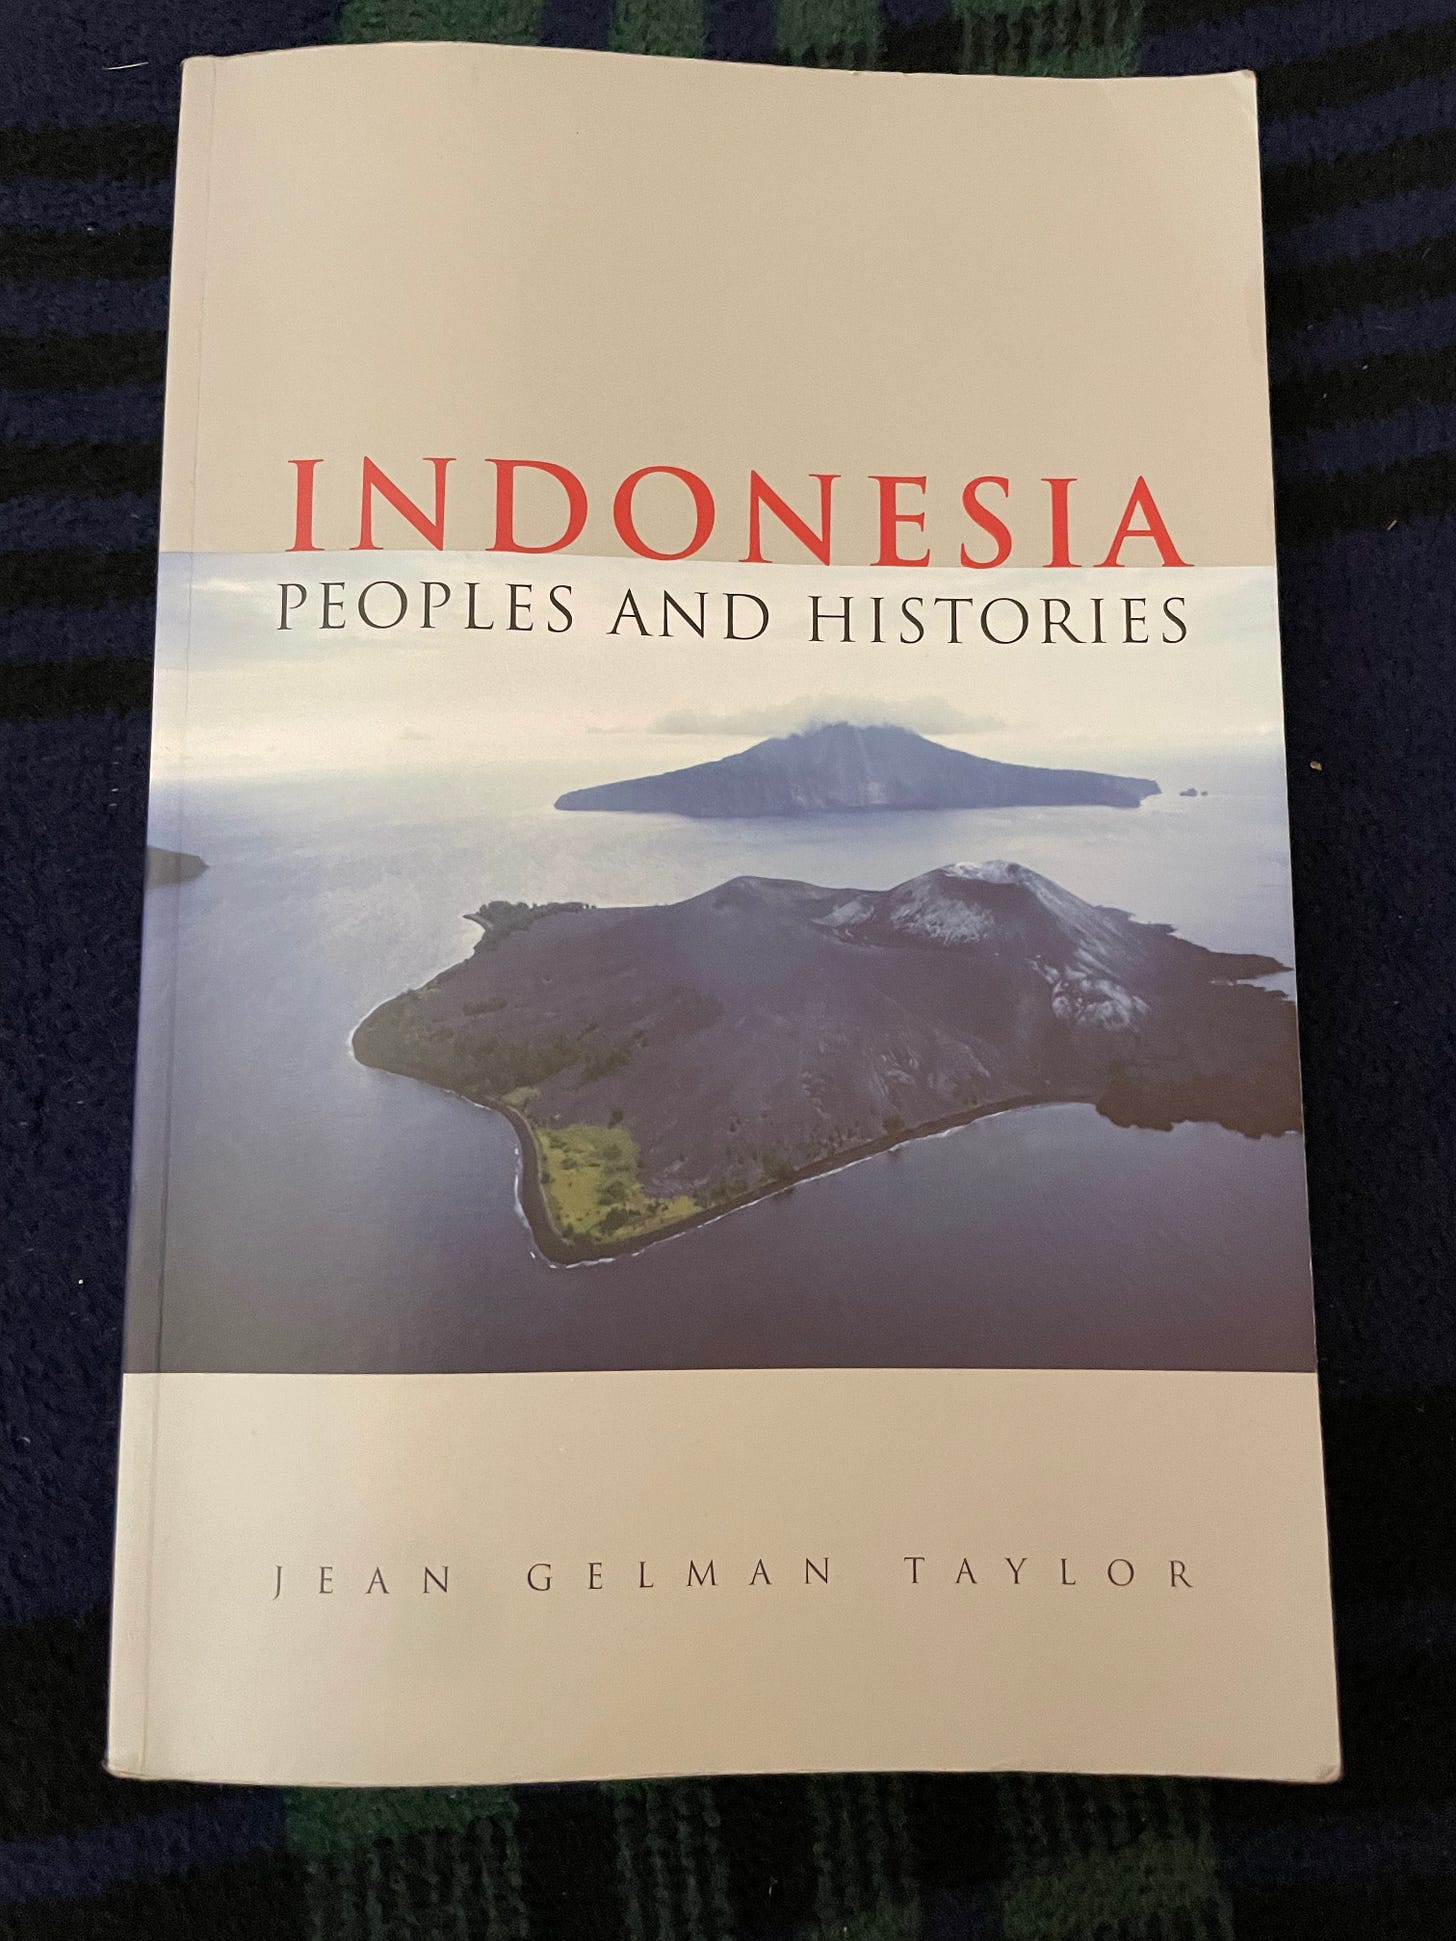 Photo of the cover of Indonesia: Peoples and Histories, by Jean Gelman Taylor. Photo by arod